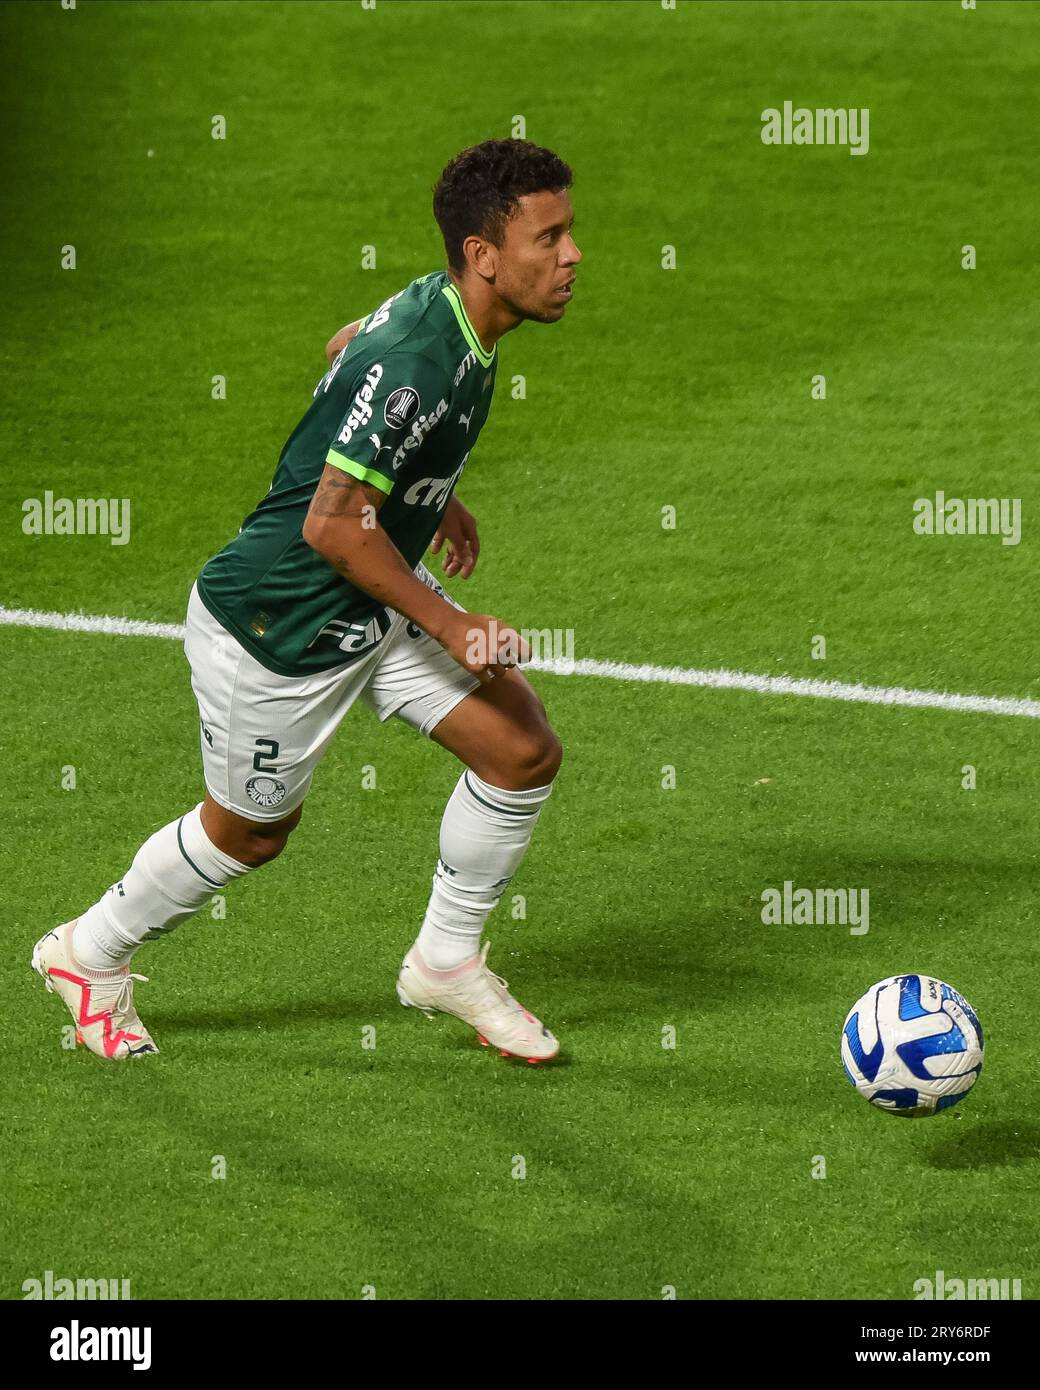 Luis rocha hi-res stock photography and images - Alamy